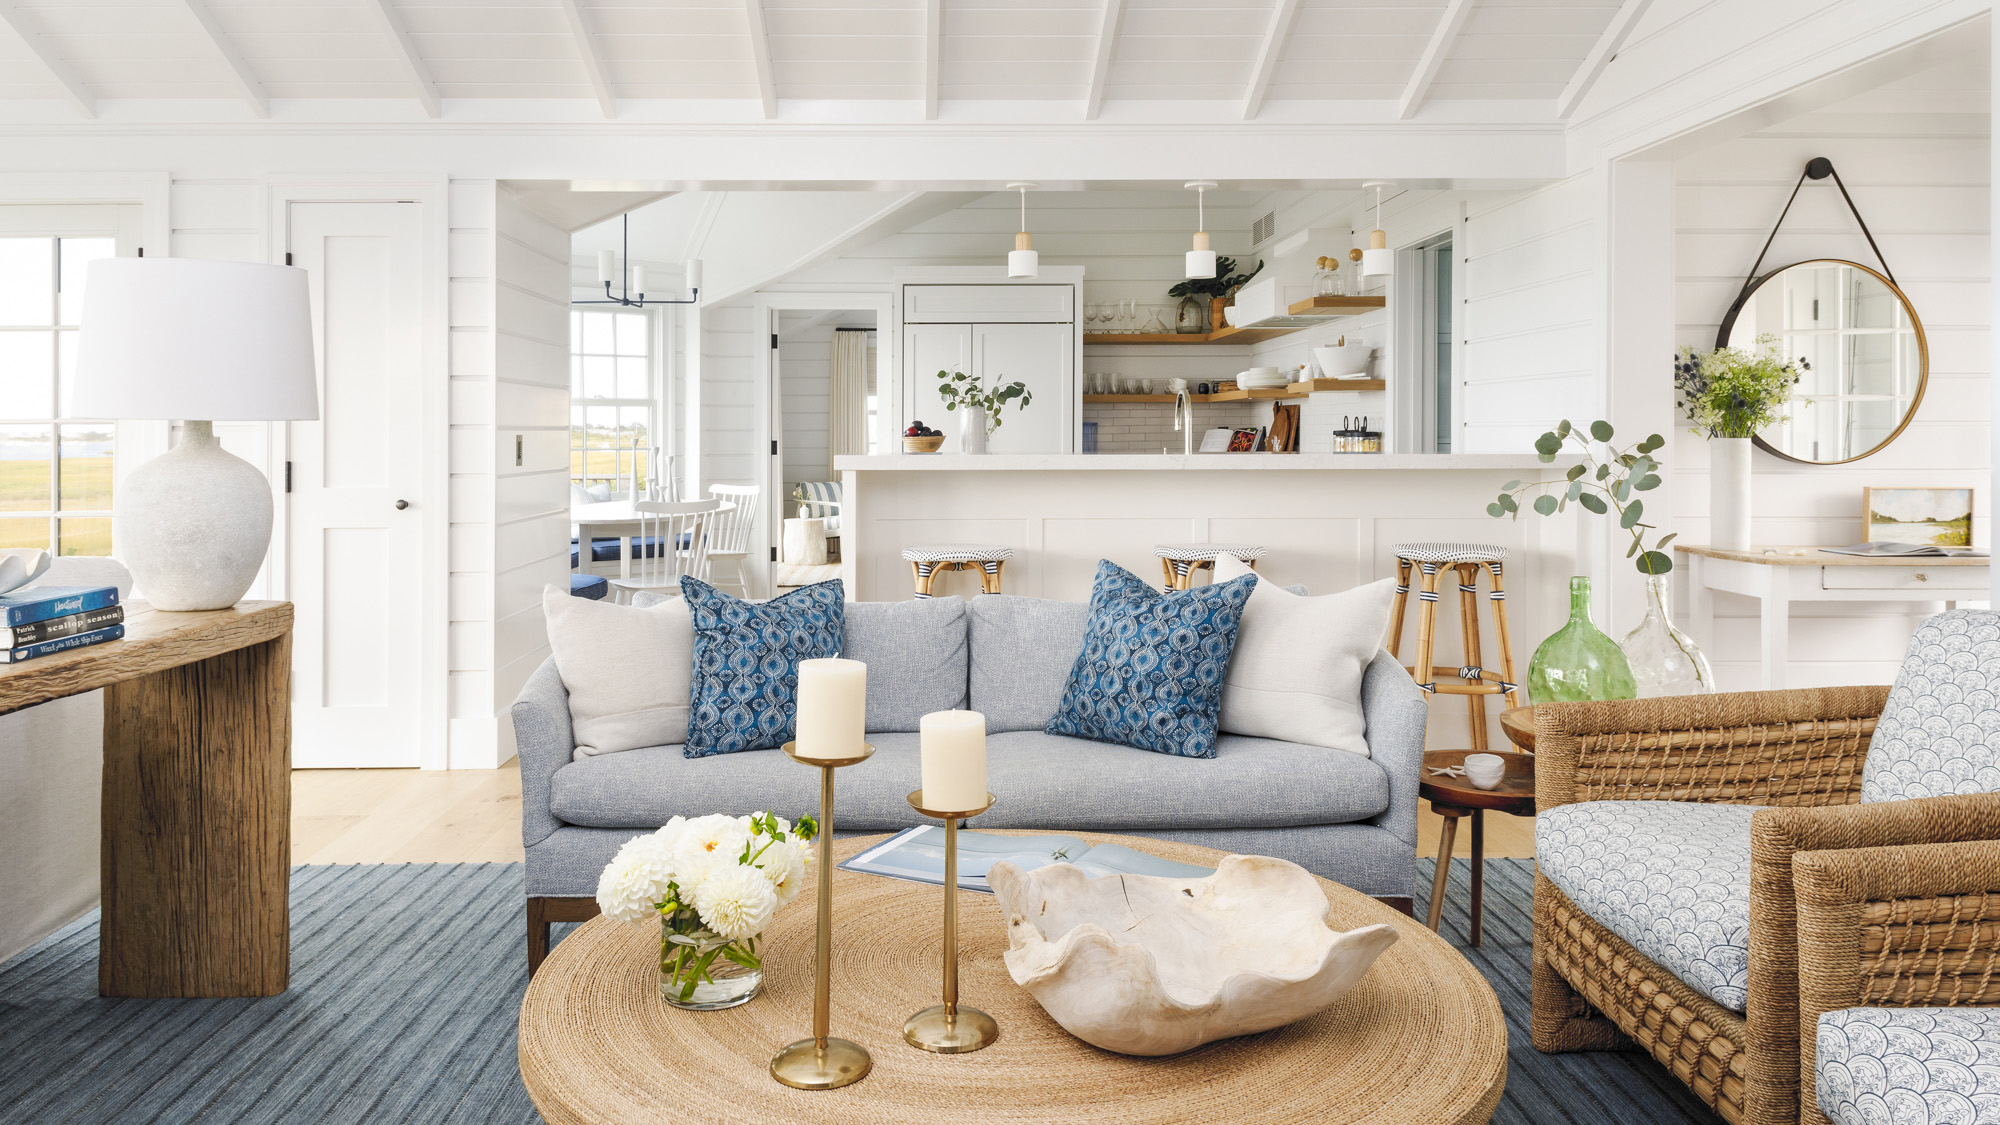 This picture-perfect coastal home gave us beach house envy | Homes